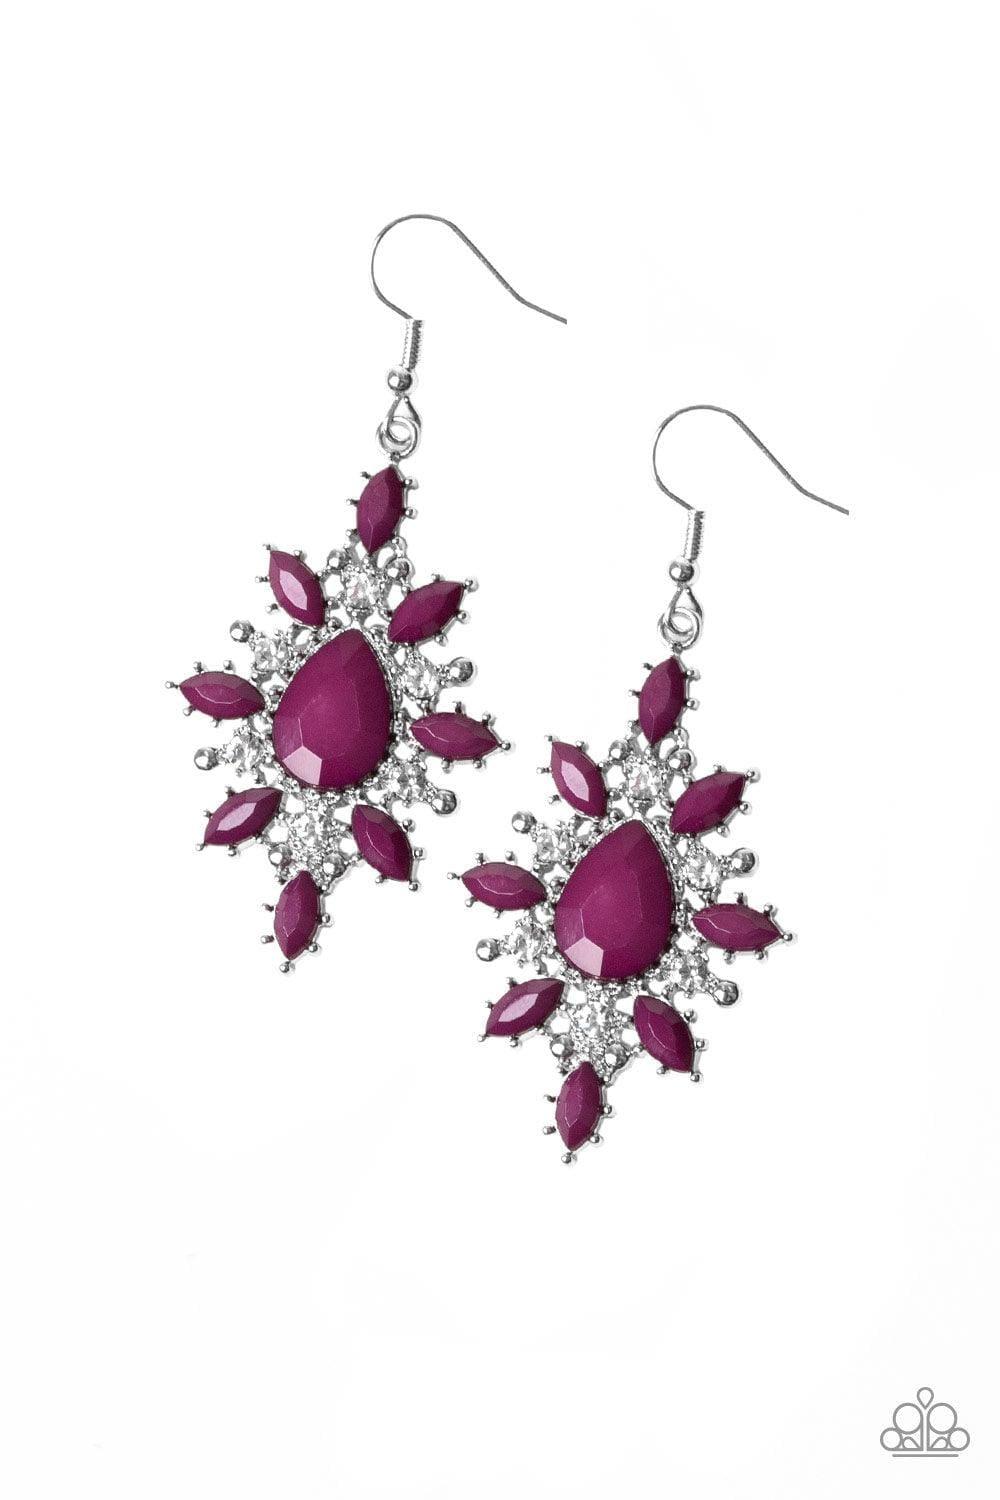 Paparazzi Accessories - Glamorously Colorful - Purple Earrings - Bling by JessieK